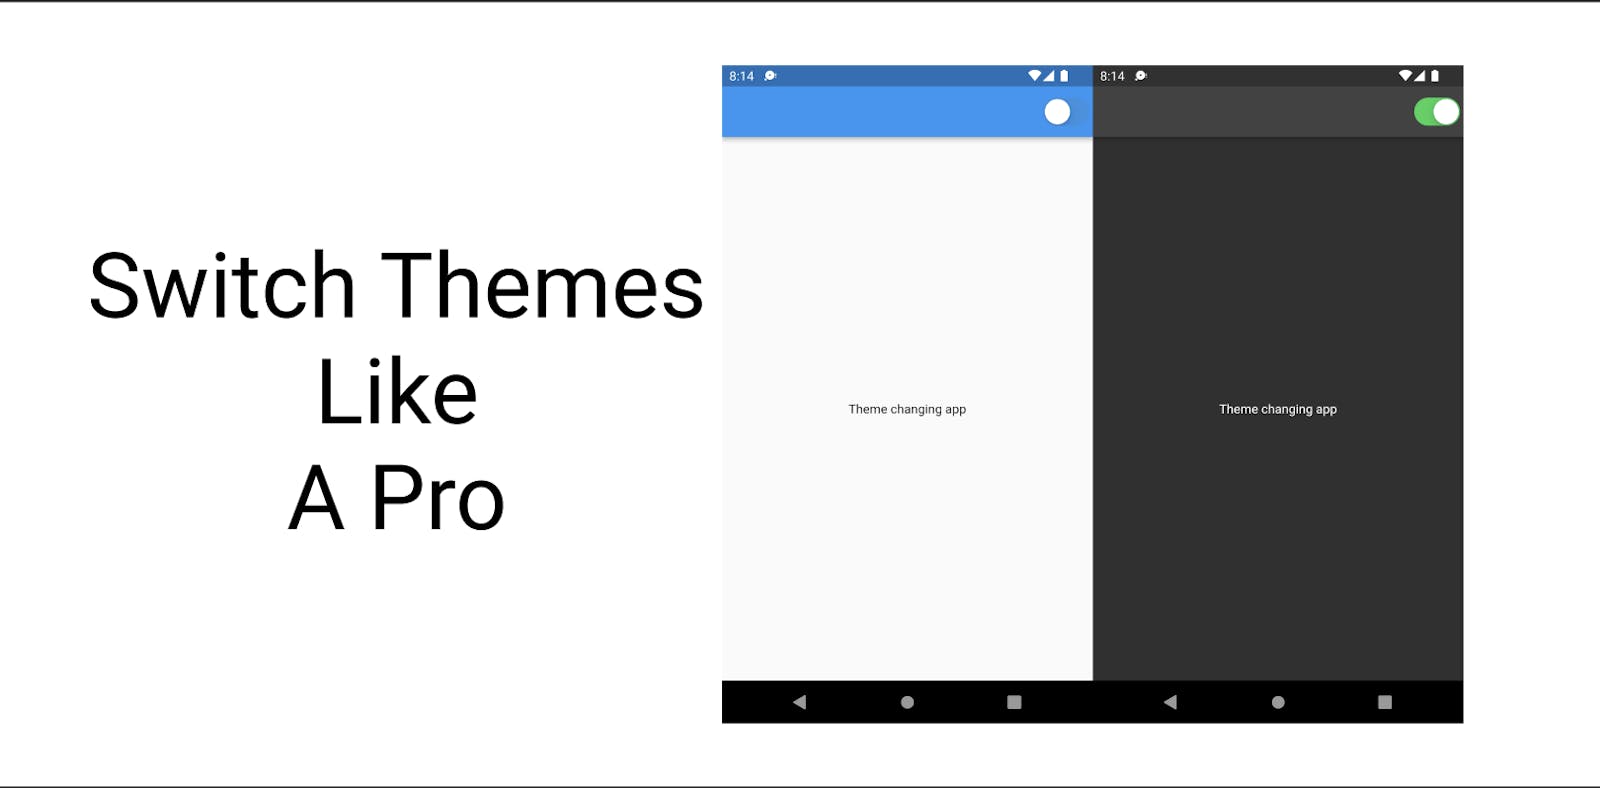 Switch themes easily in Flutter using Bloc